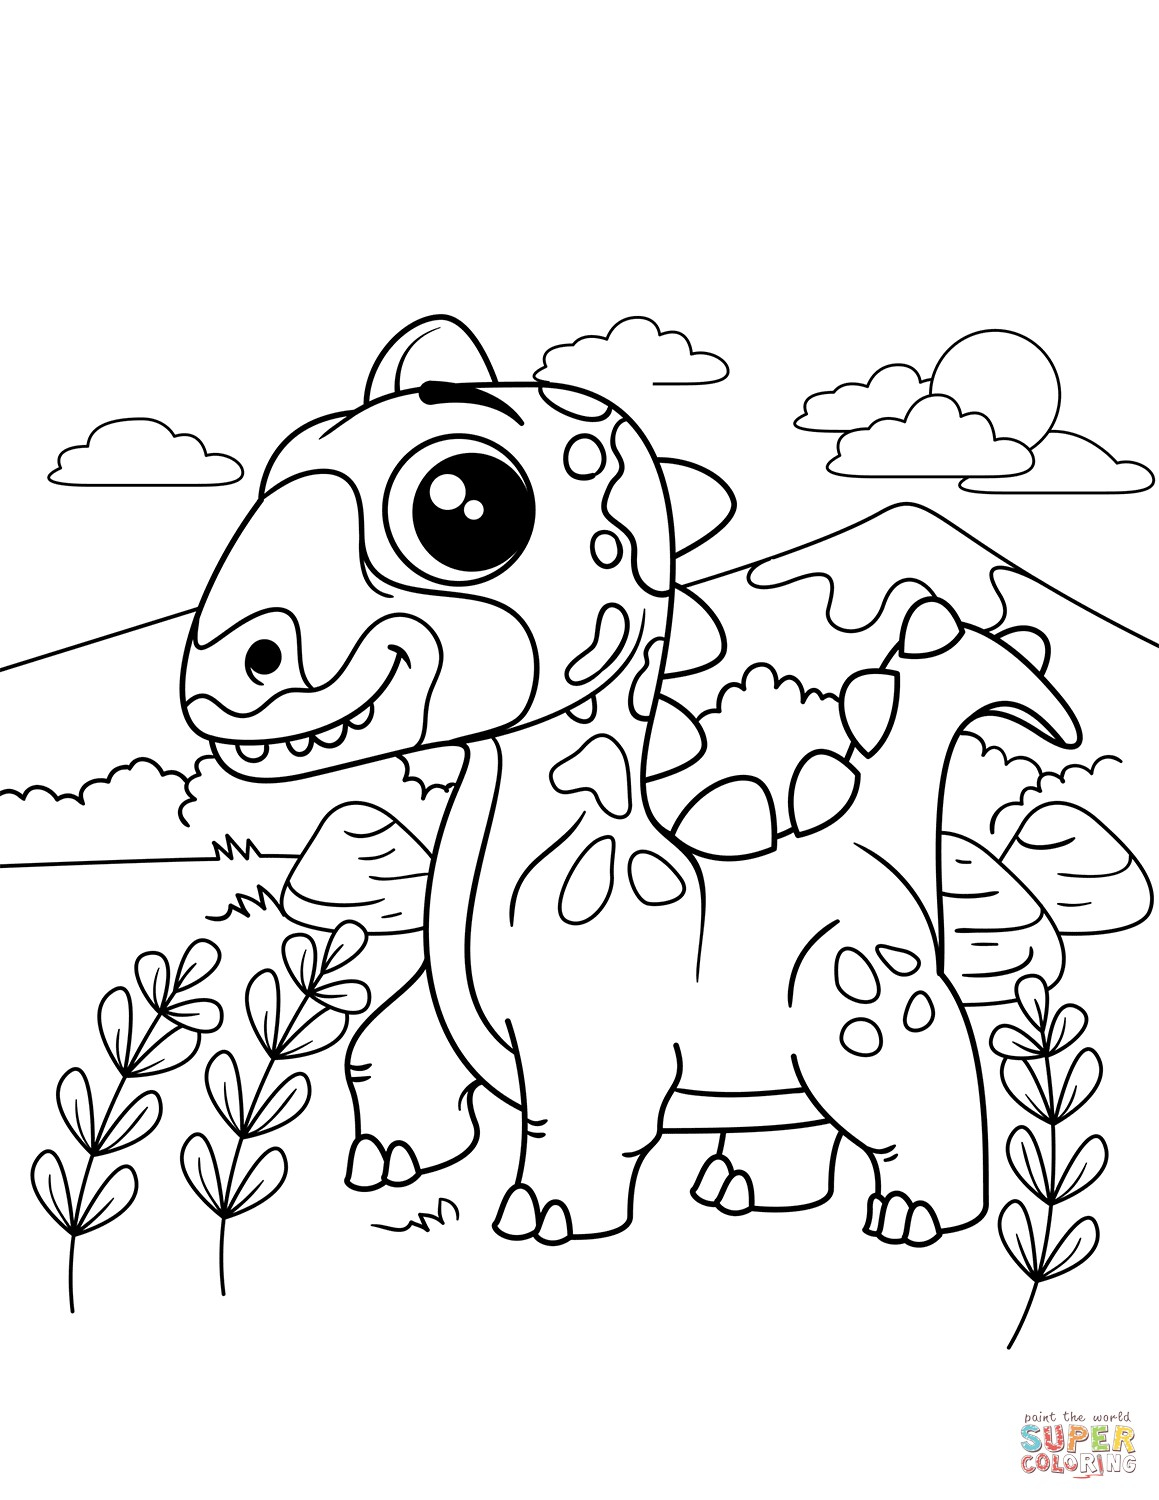 Purim Coloring Page Purim Coloring Pages For Kids Printable Coloring Page For Kids